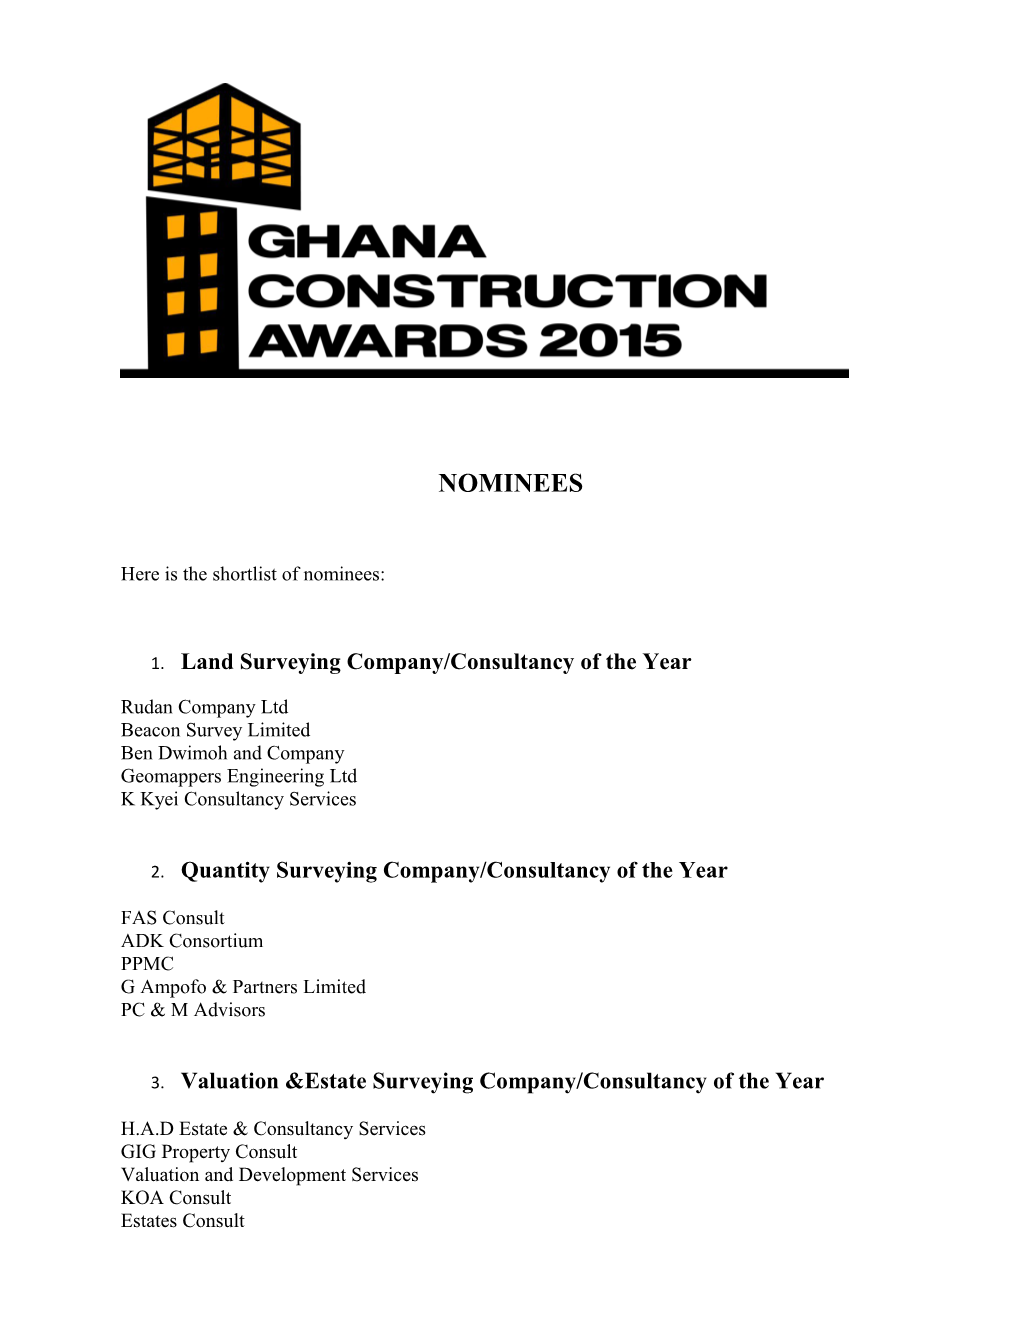 Here Is the Shortlist of Nominees